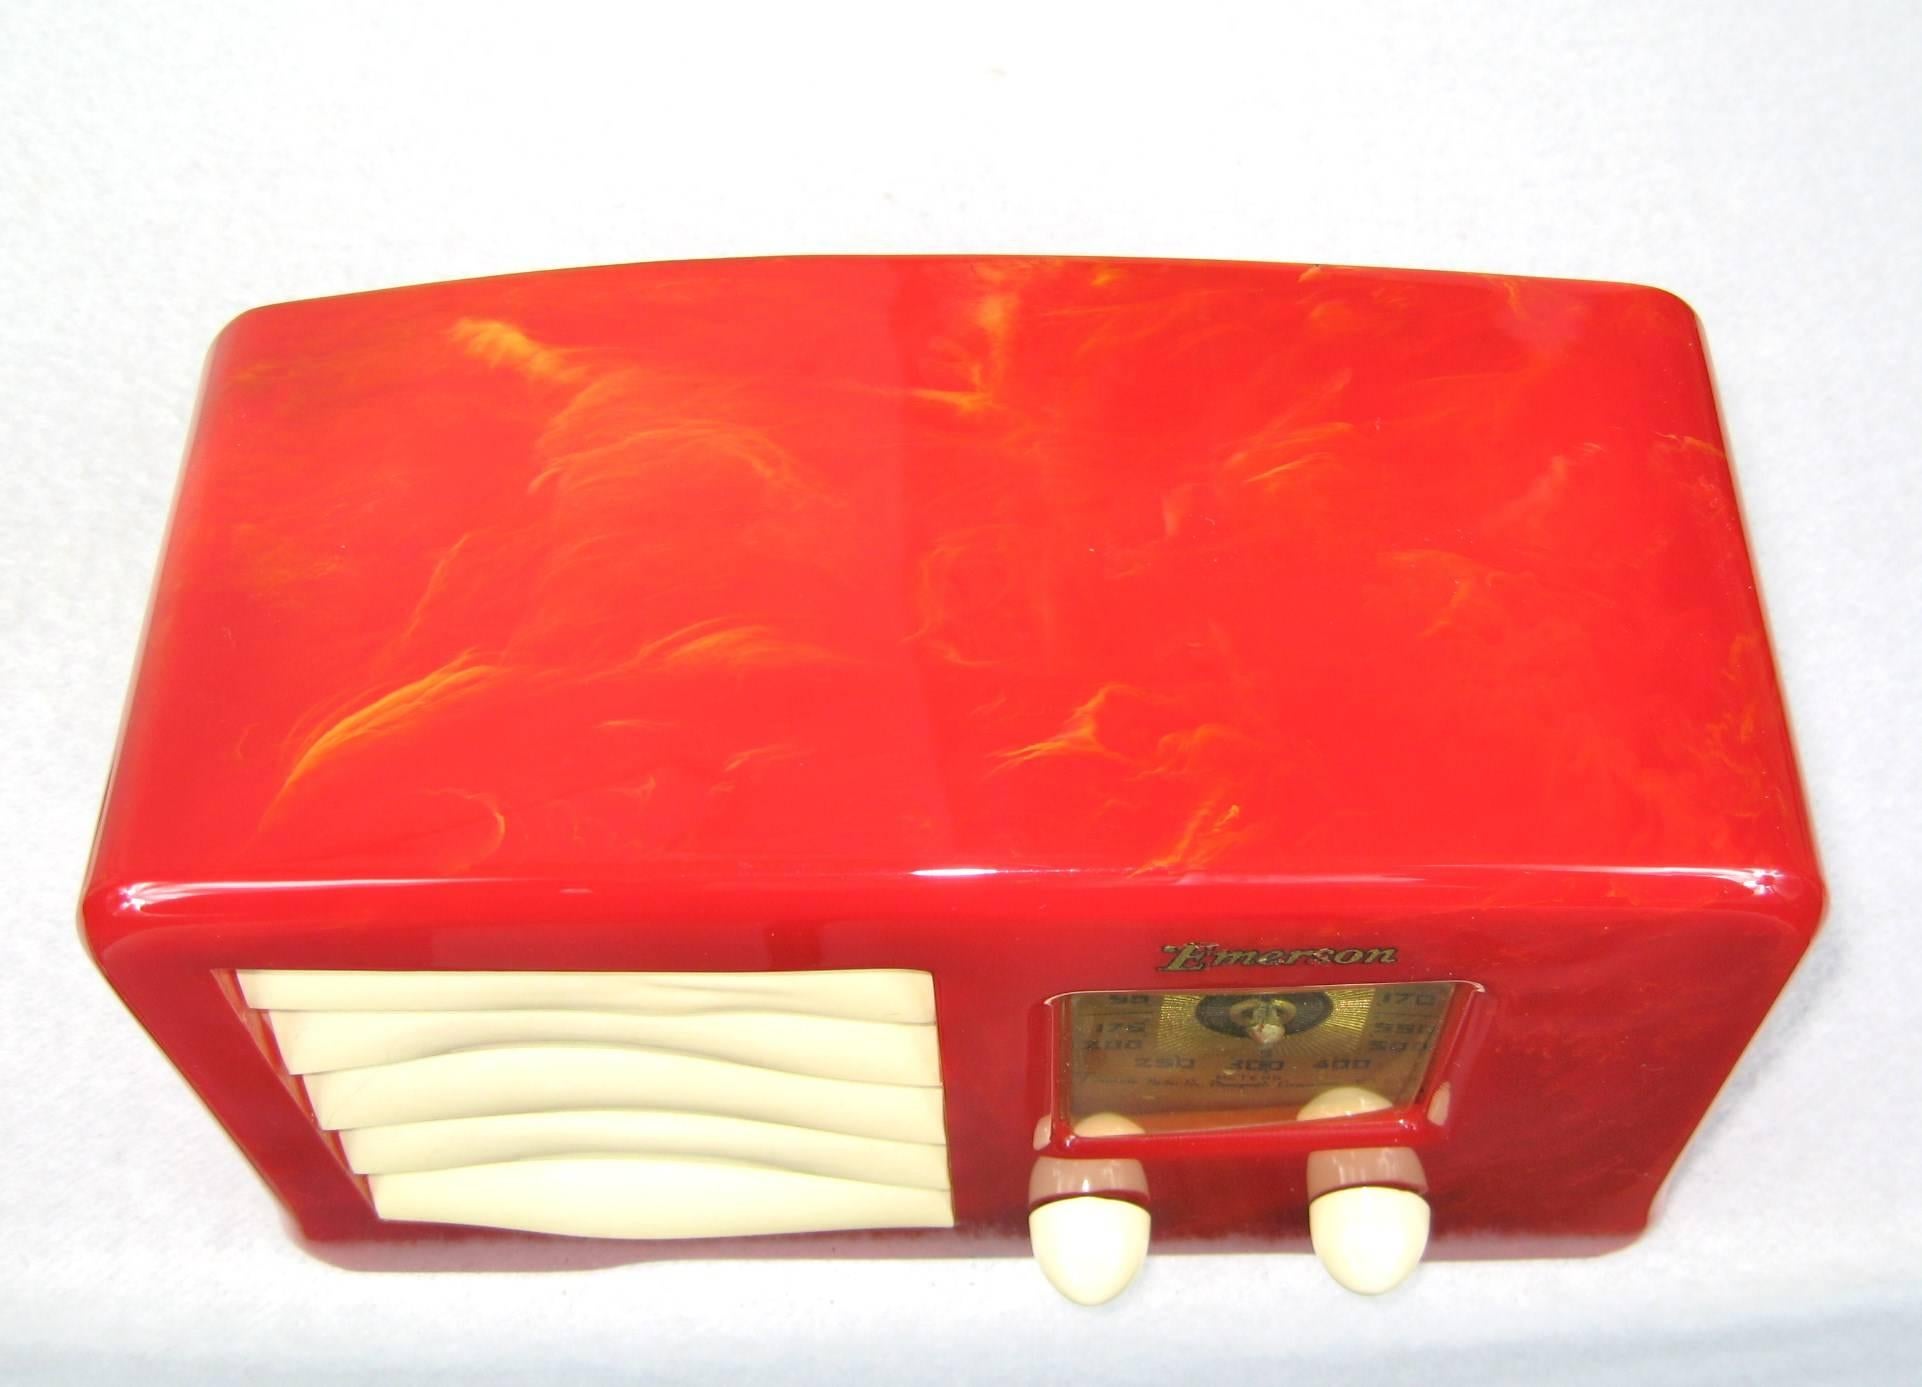 1938 Emerson Art Deco radio, red marbleized case, with original off-white-colored trim.
All original. Check my storefront for more collectible radios. We also offer lovely items to decorate your home or workspace with. Any questions, please call,